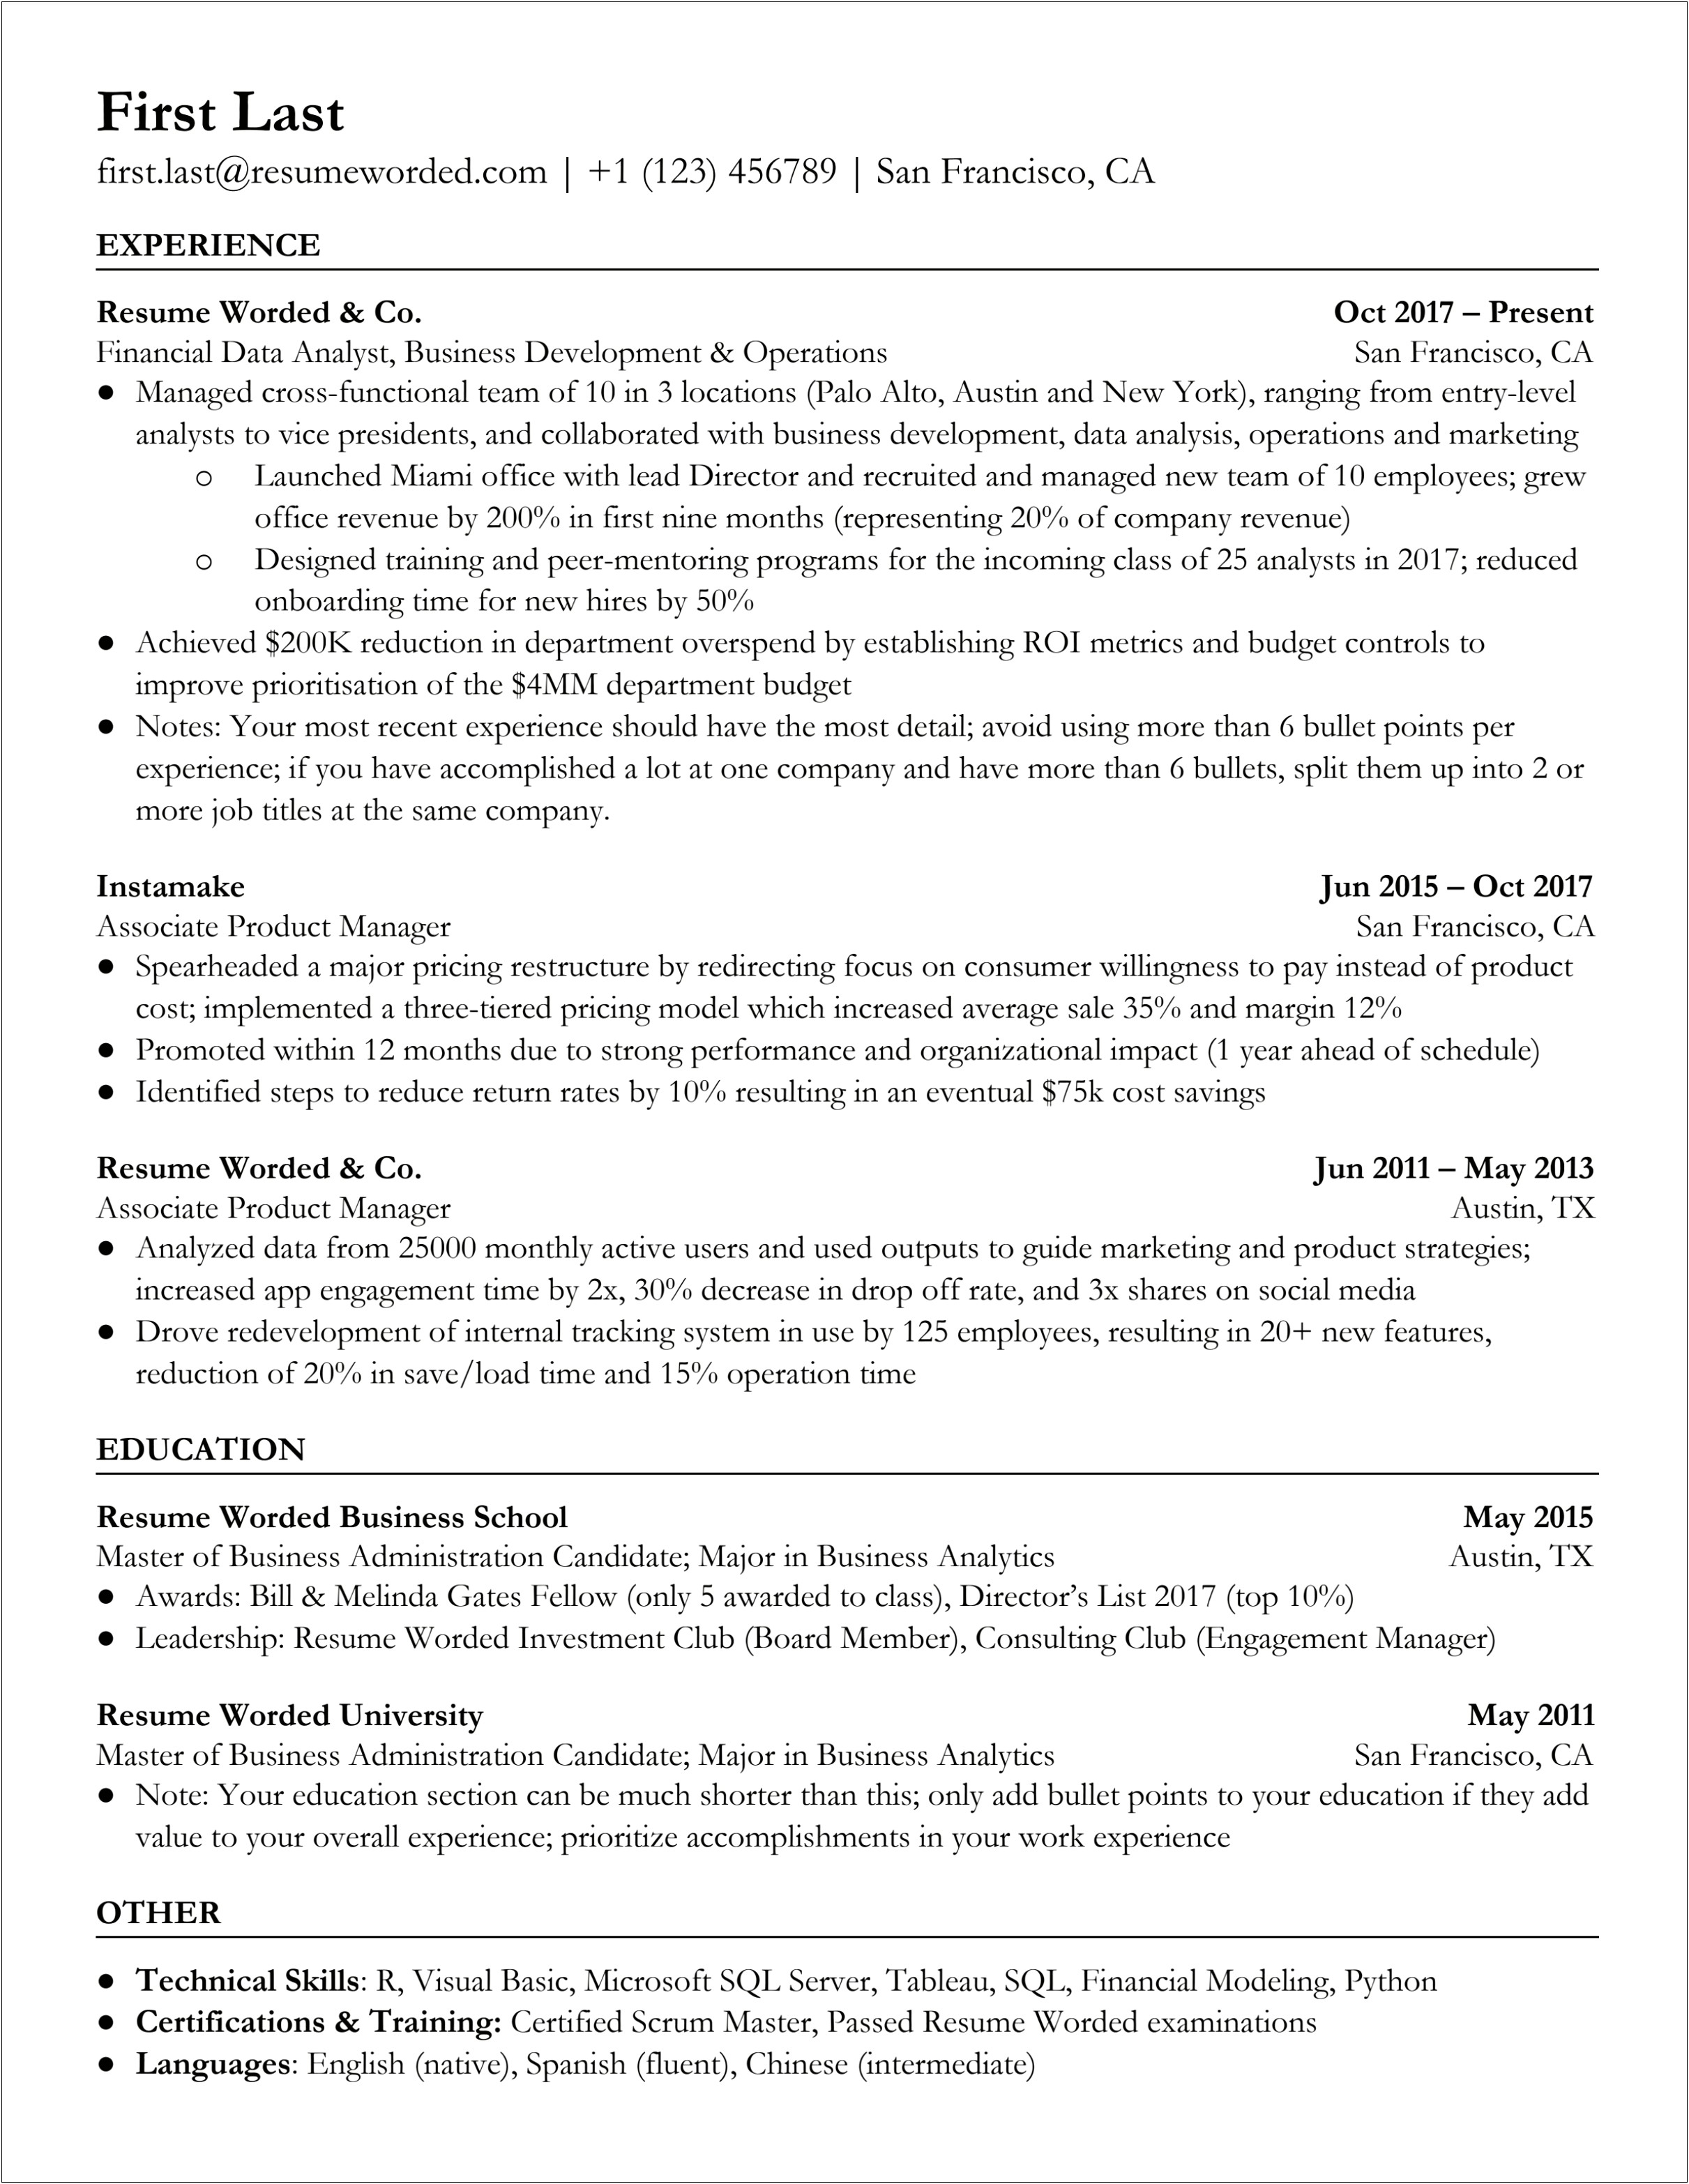 Resume Objective For Analyst Manager